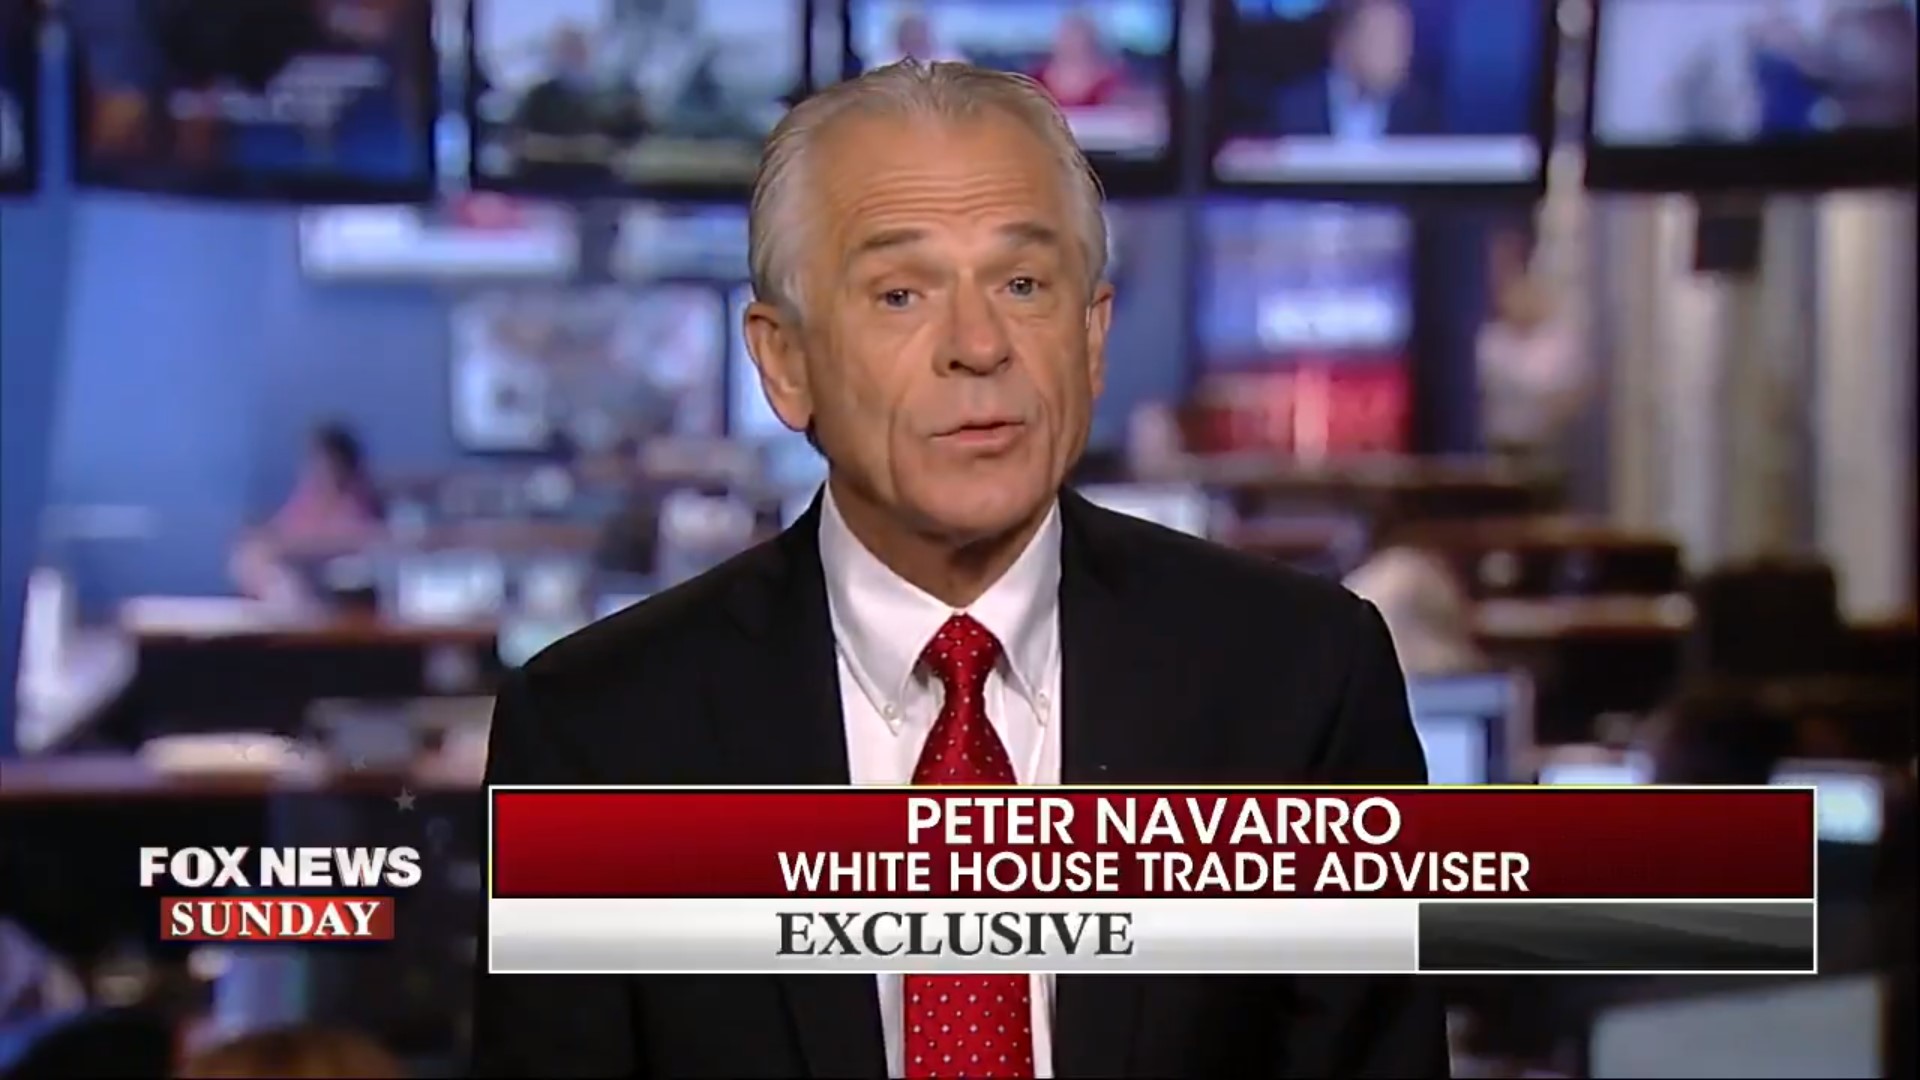 White House Adviser Peter Navarro: ‘Special Place In Hell’ For ‘Bad Faith’ Justin Trudeau